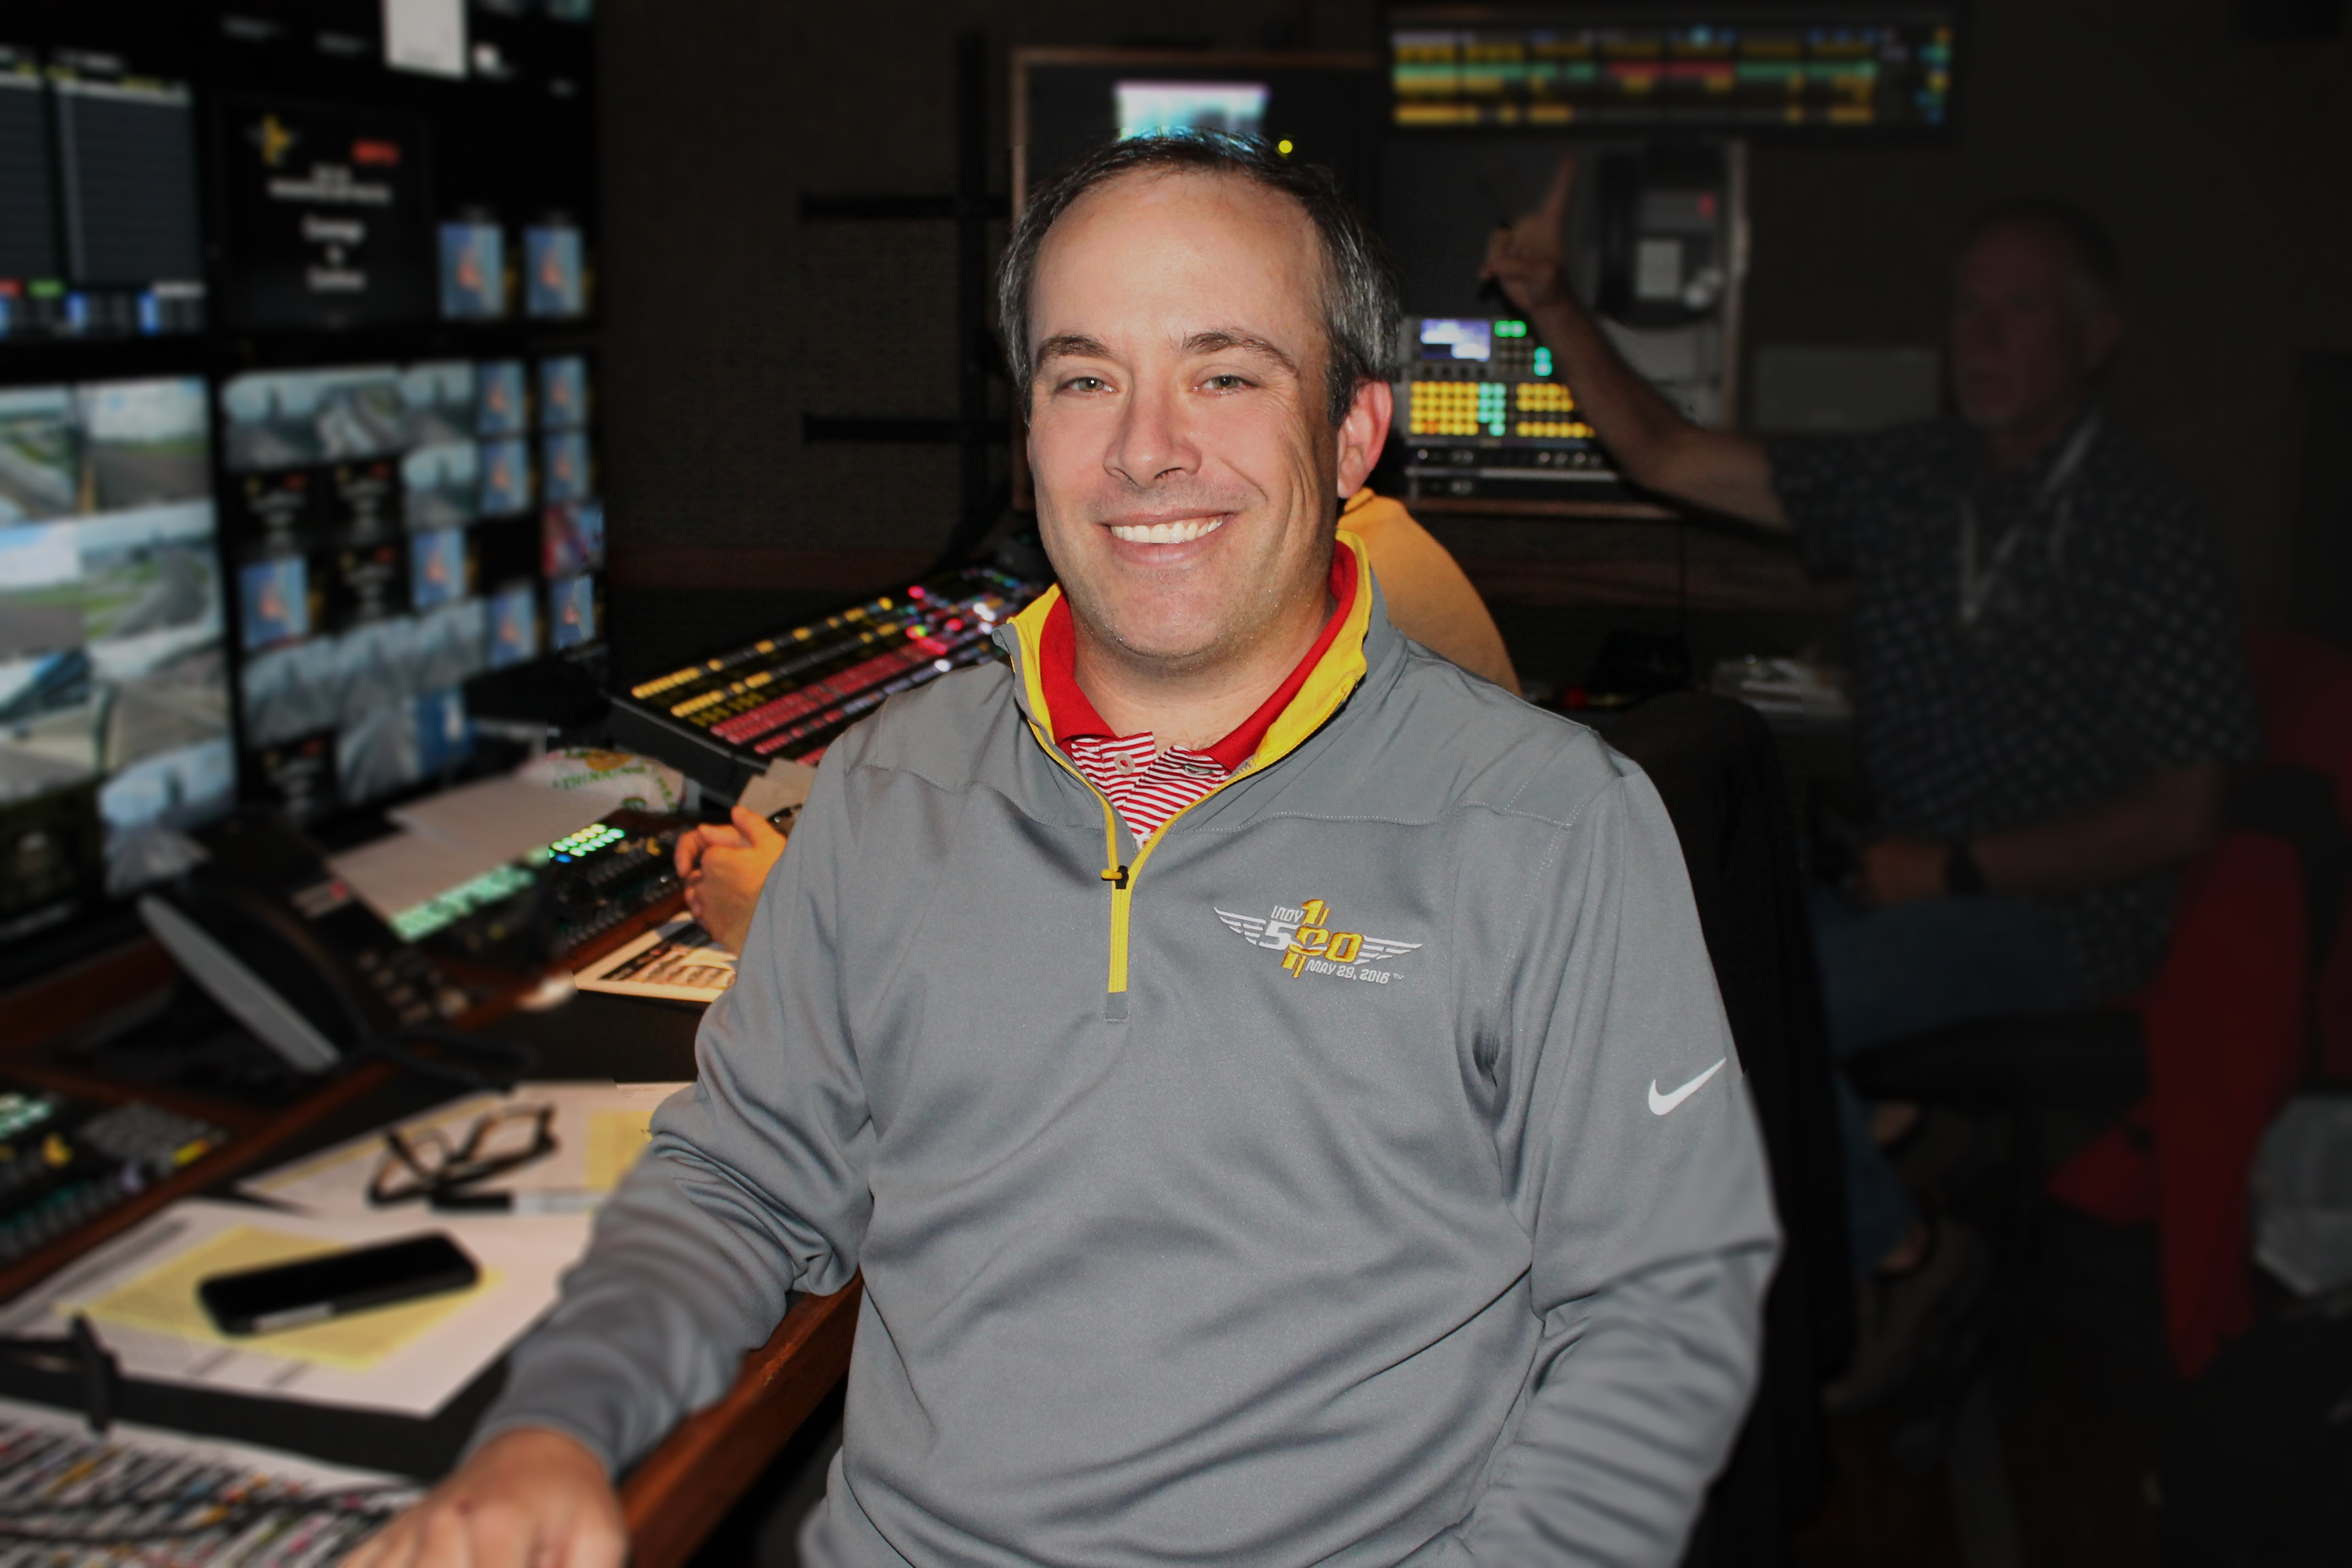  Jim Gaiero in the ESPN production truck at Indianapolis Motor Speedway. (Liah Corral)